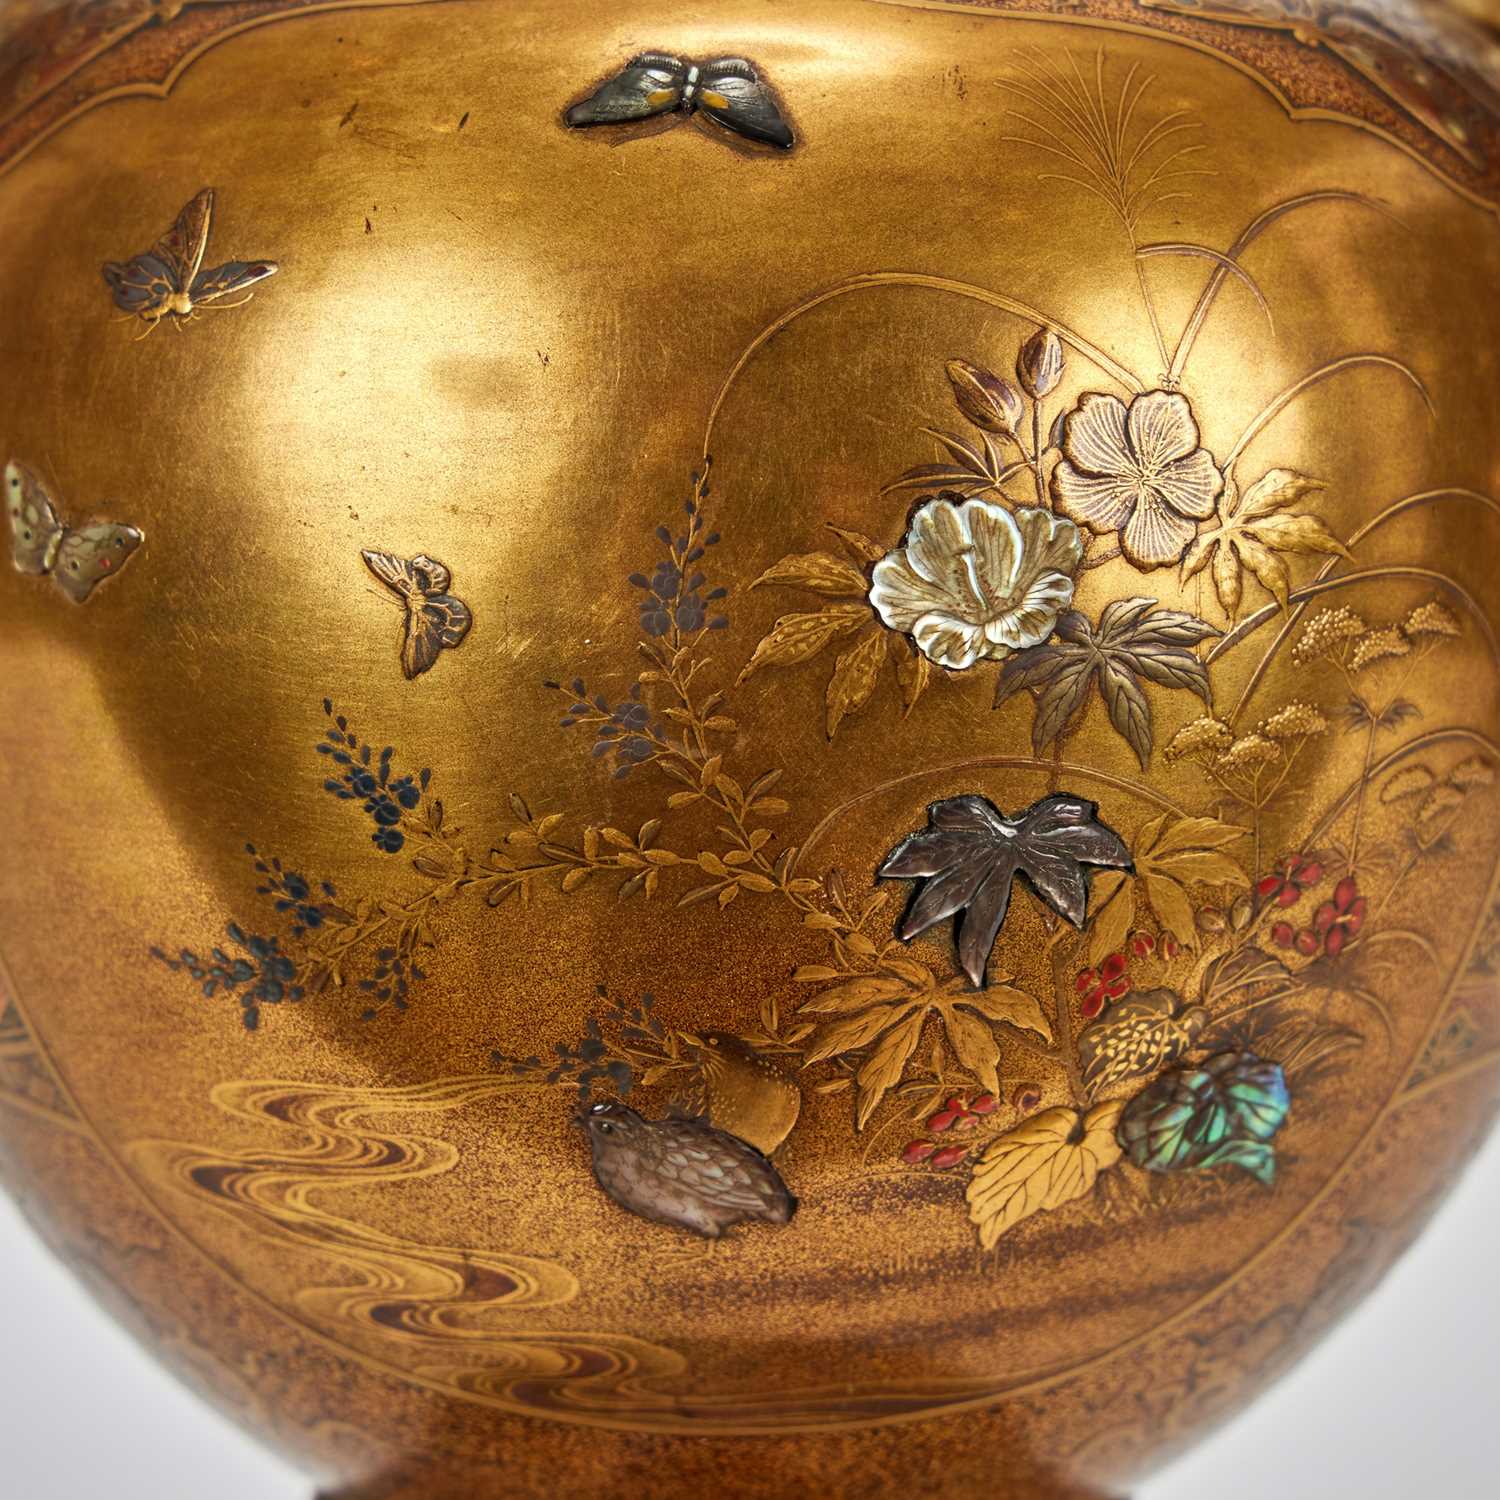 AN EXCEPTIONAL PAIR OF JAPANESE MEIJI PERIOD GOLD LACQUER AND SHIBAYAMA INLAID URNS - Image 6 of 9